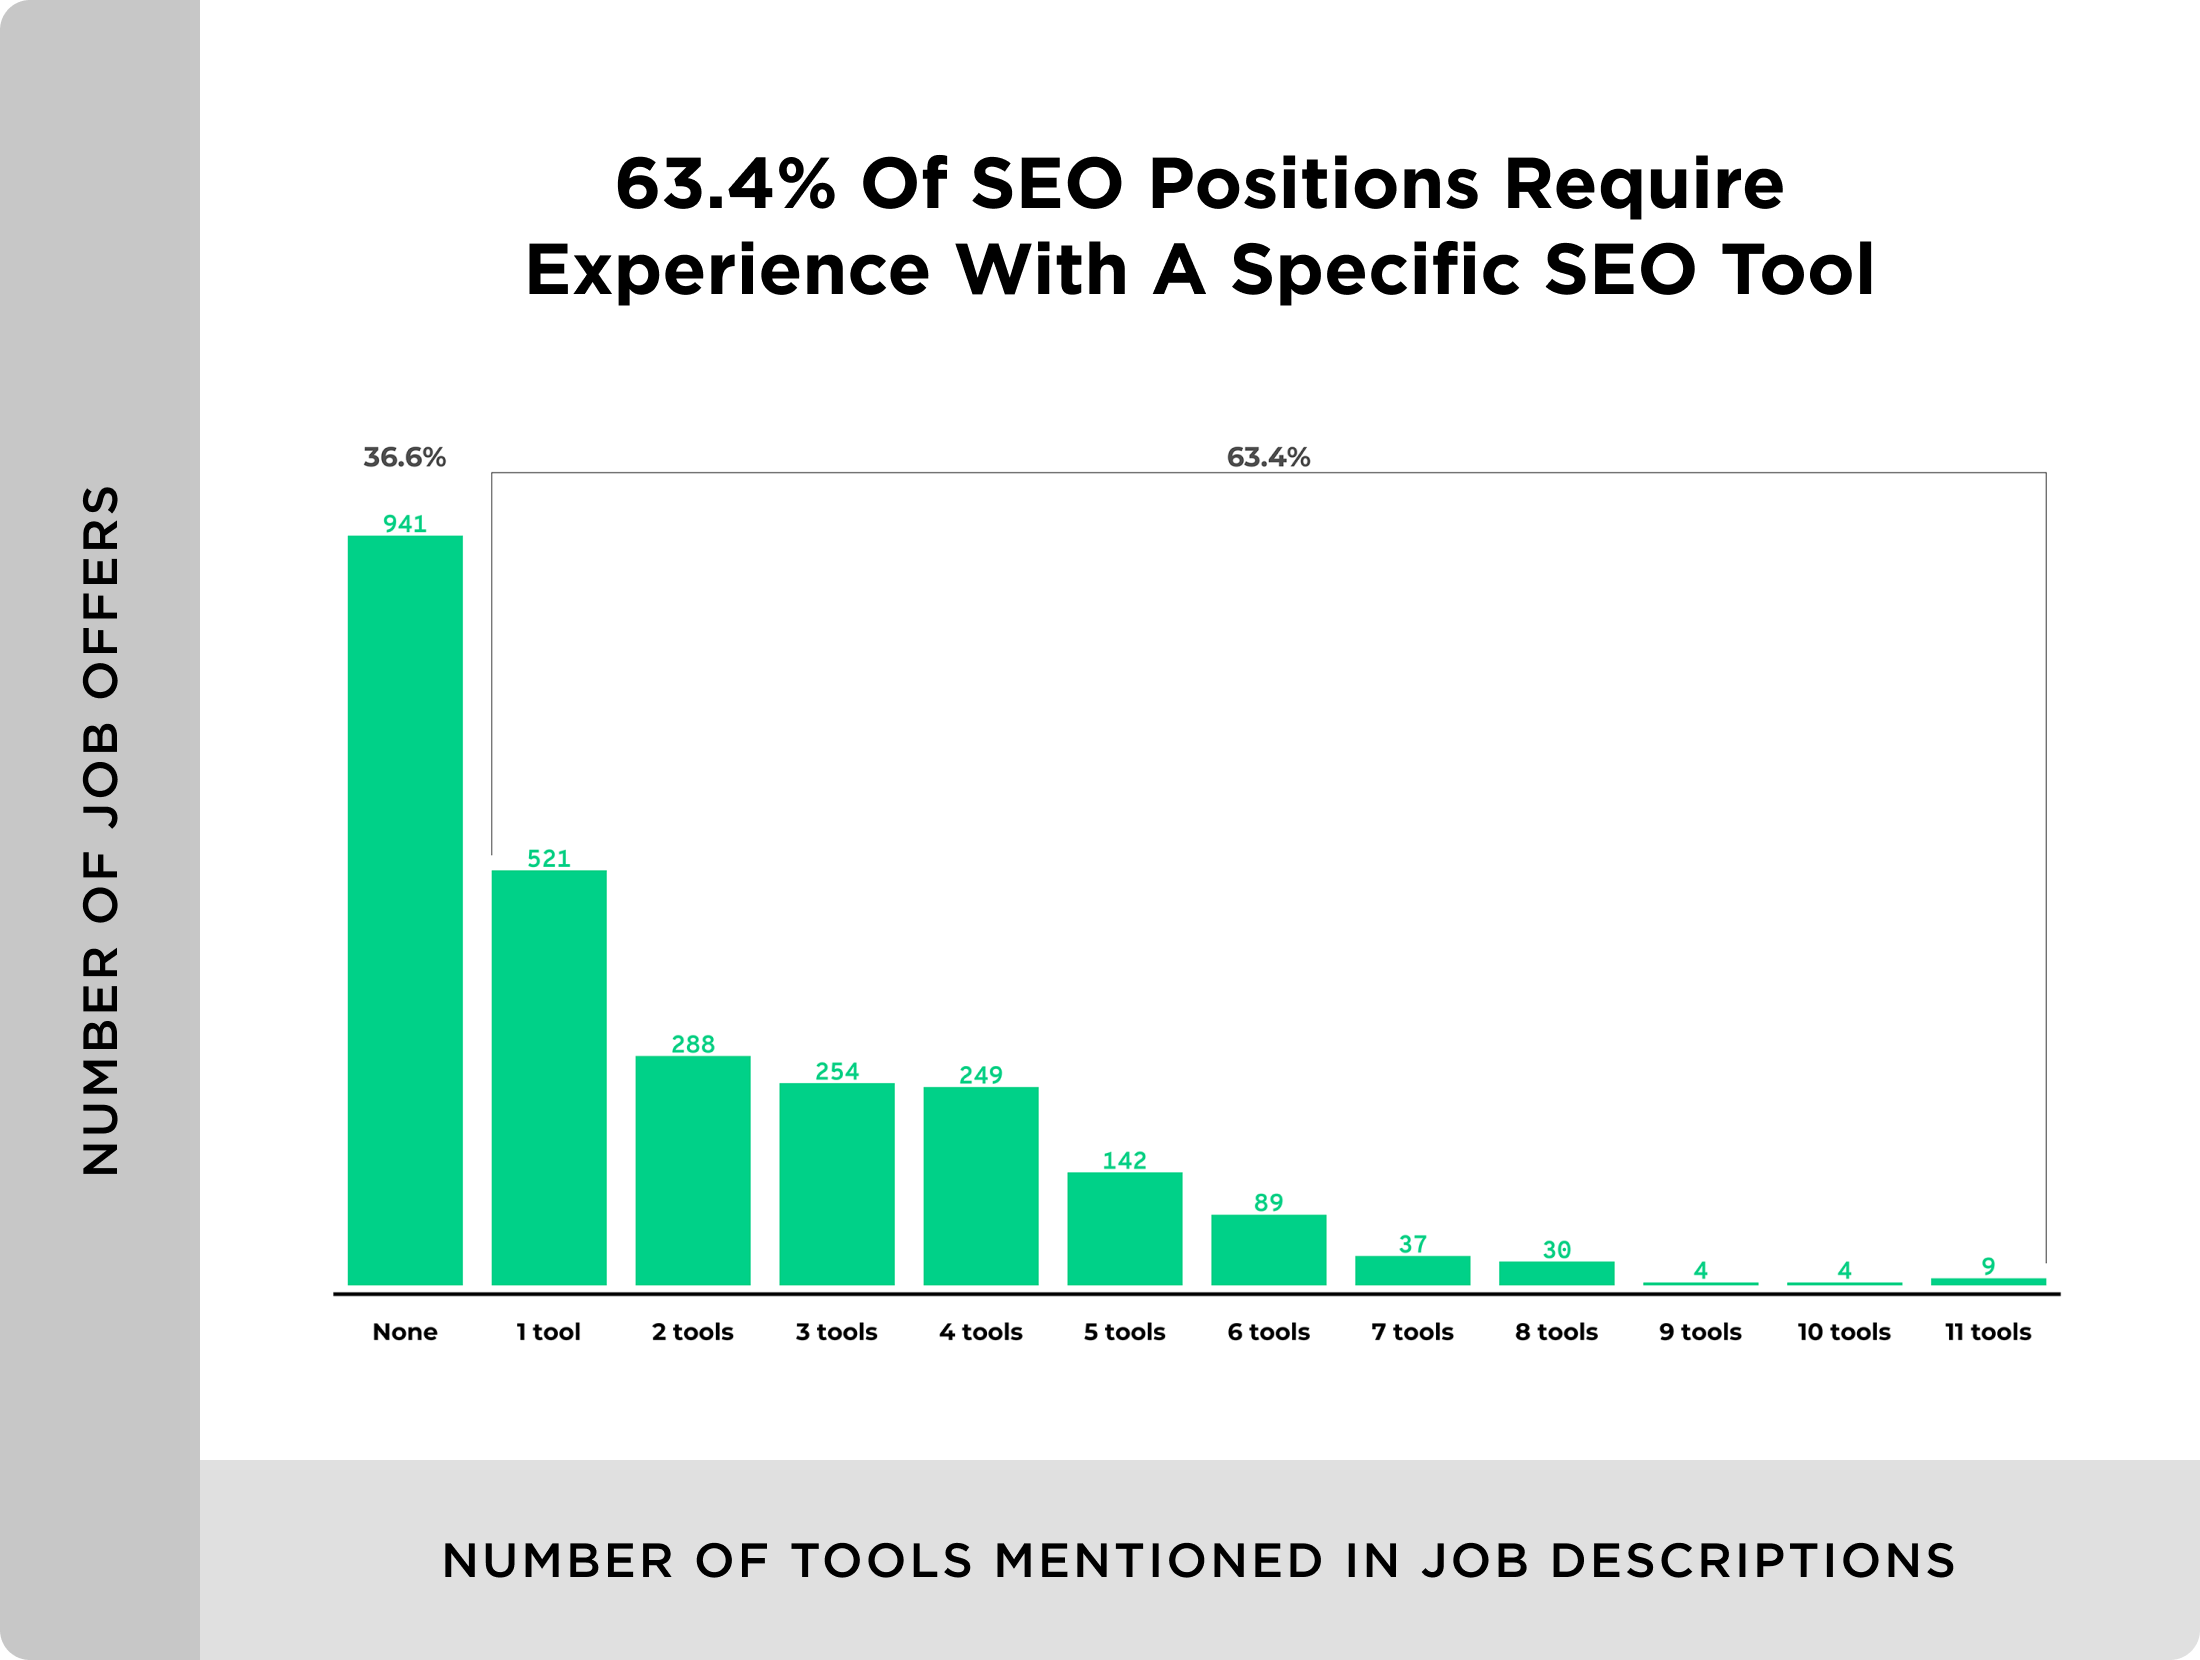 Number of tools mentioned in job descriptions